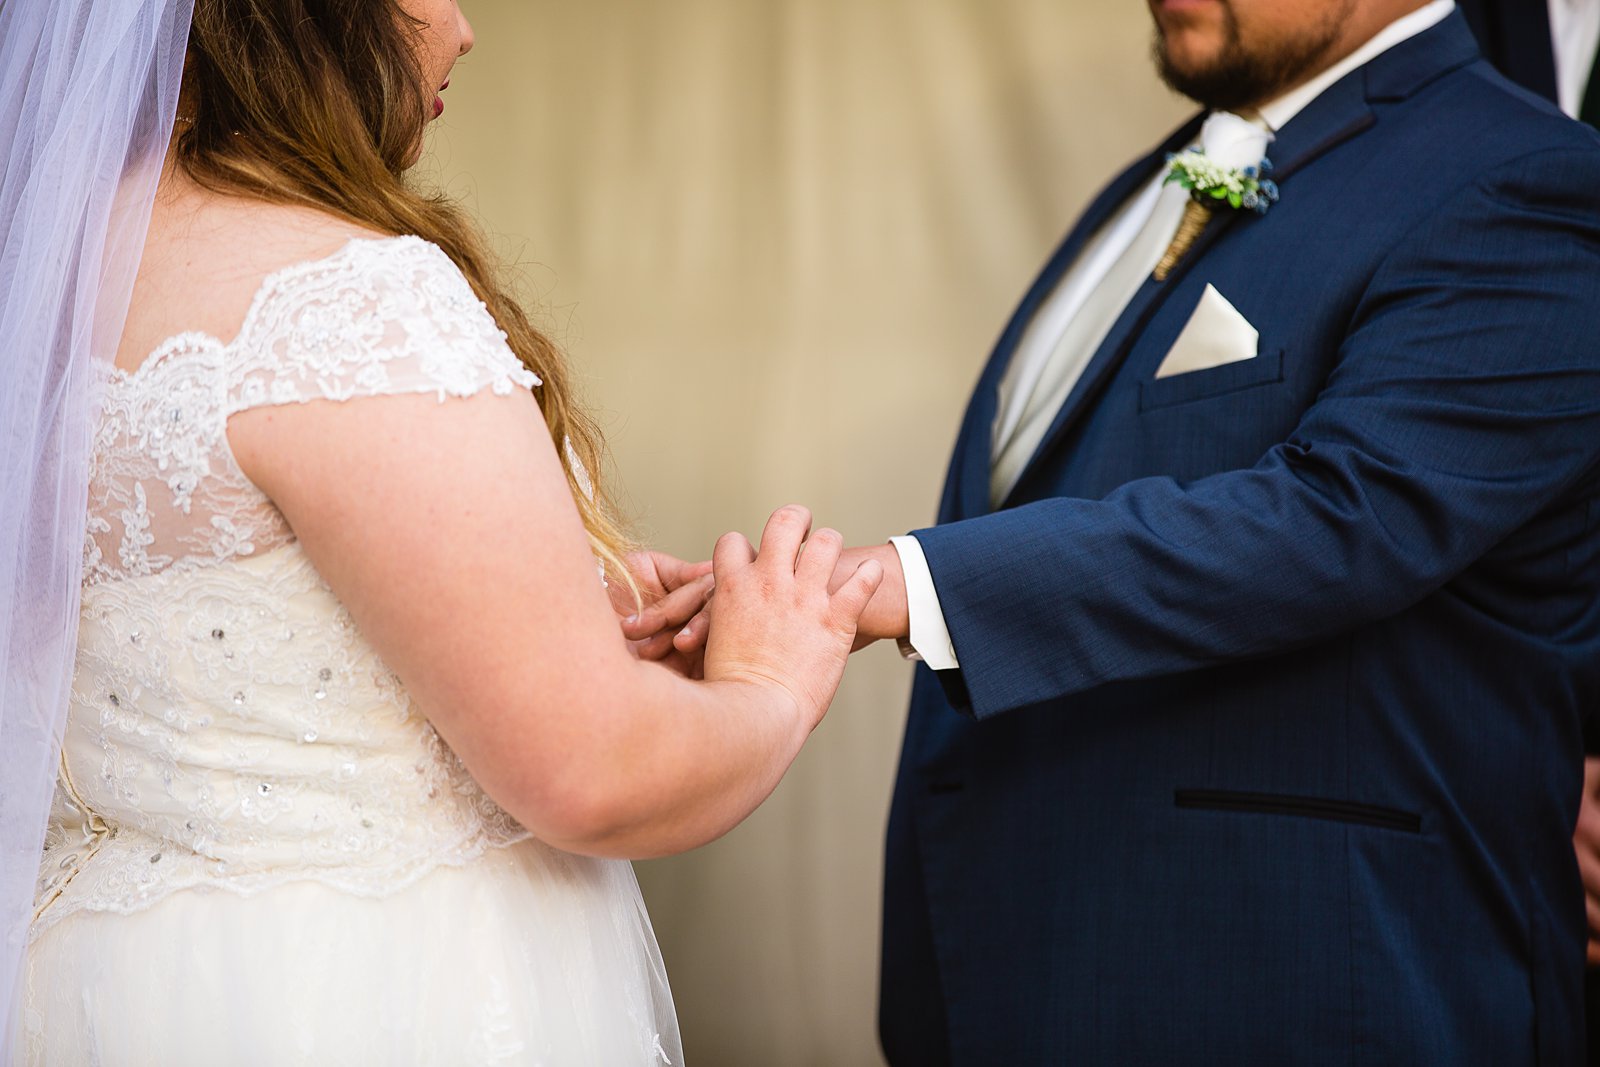 Bride and Groom exchange rings during their wedding ceremony at Backyard by Arizona wedding photographer PMA Photography.